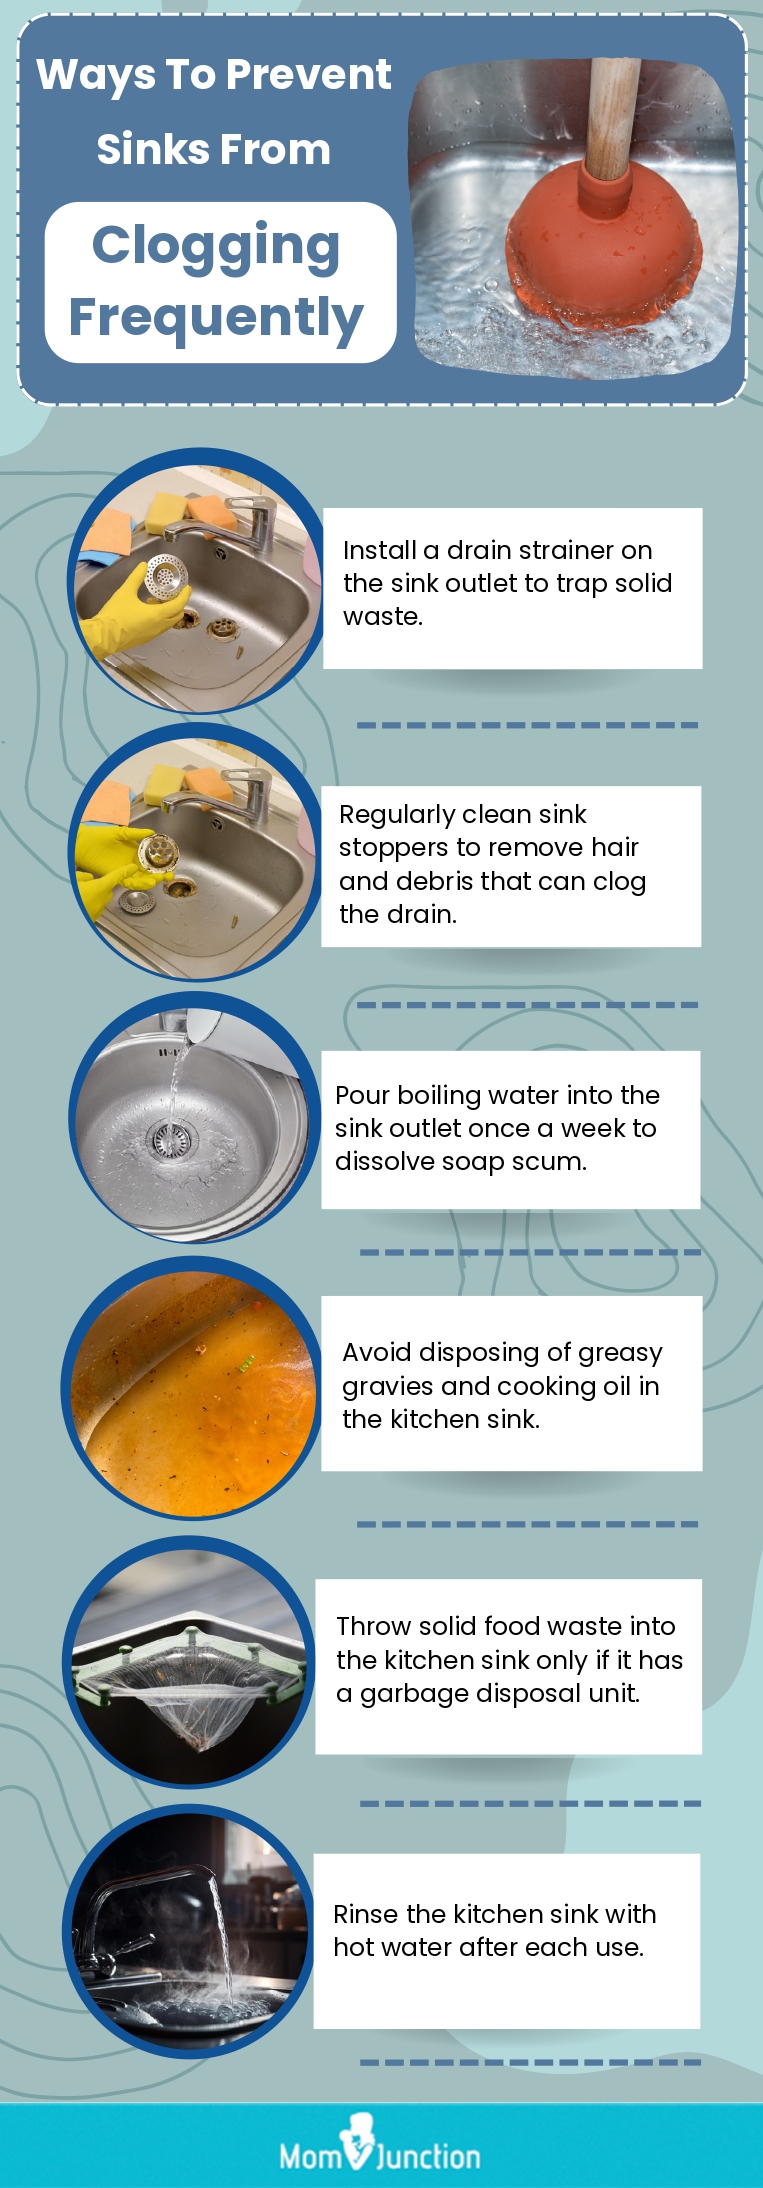 Ways To Prevent Sinks From Clogging Frequently (infographic)